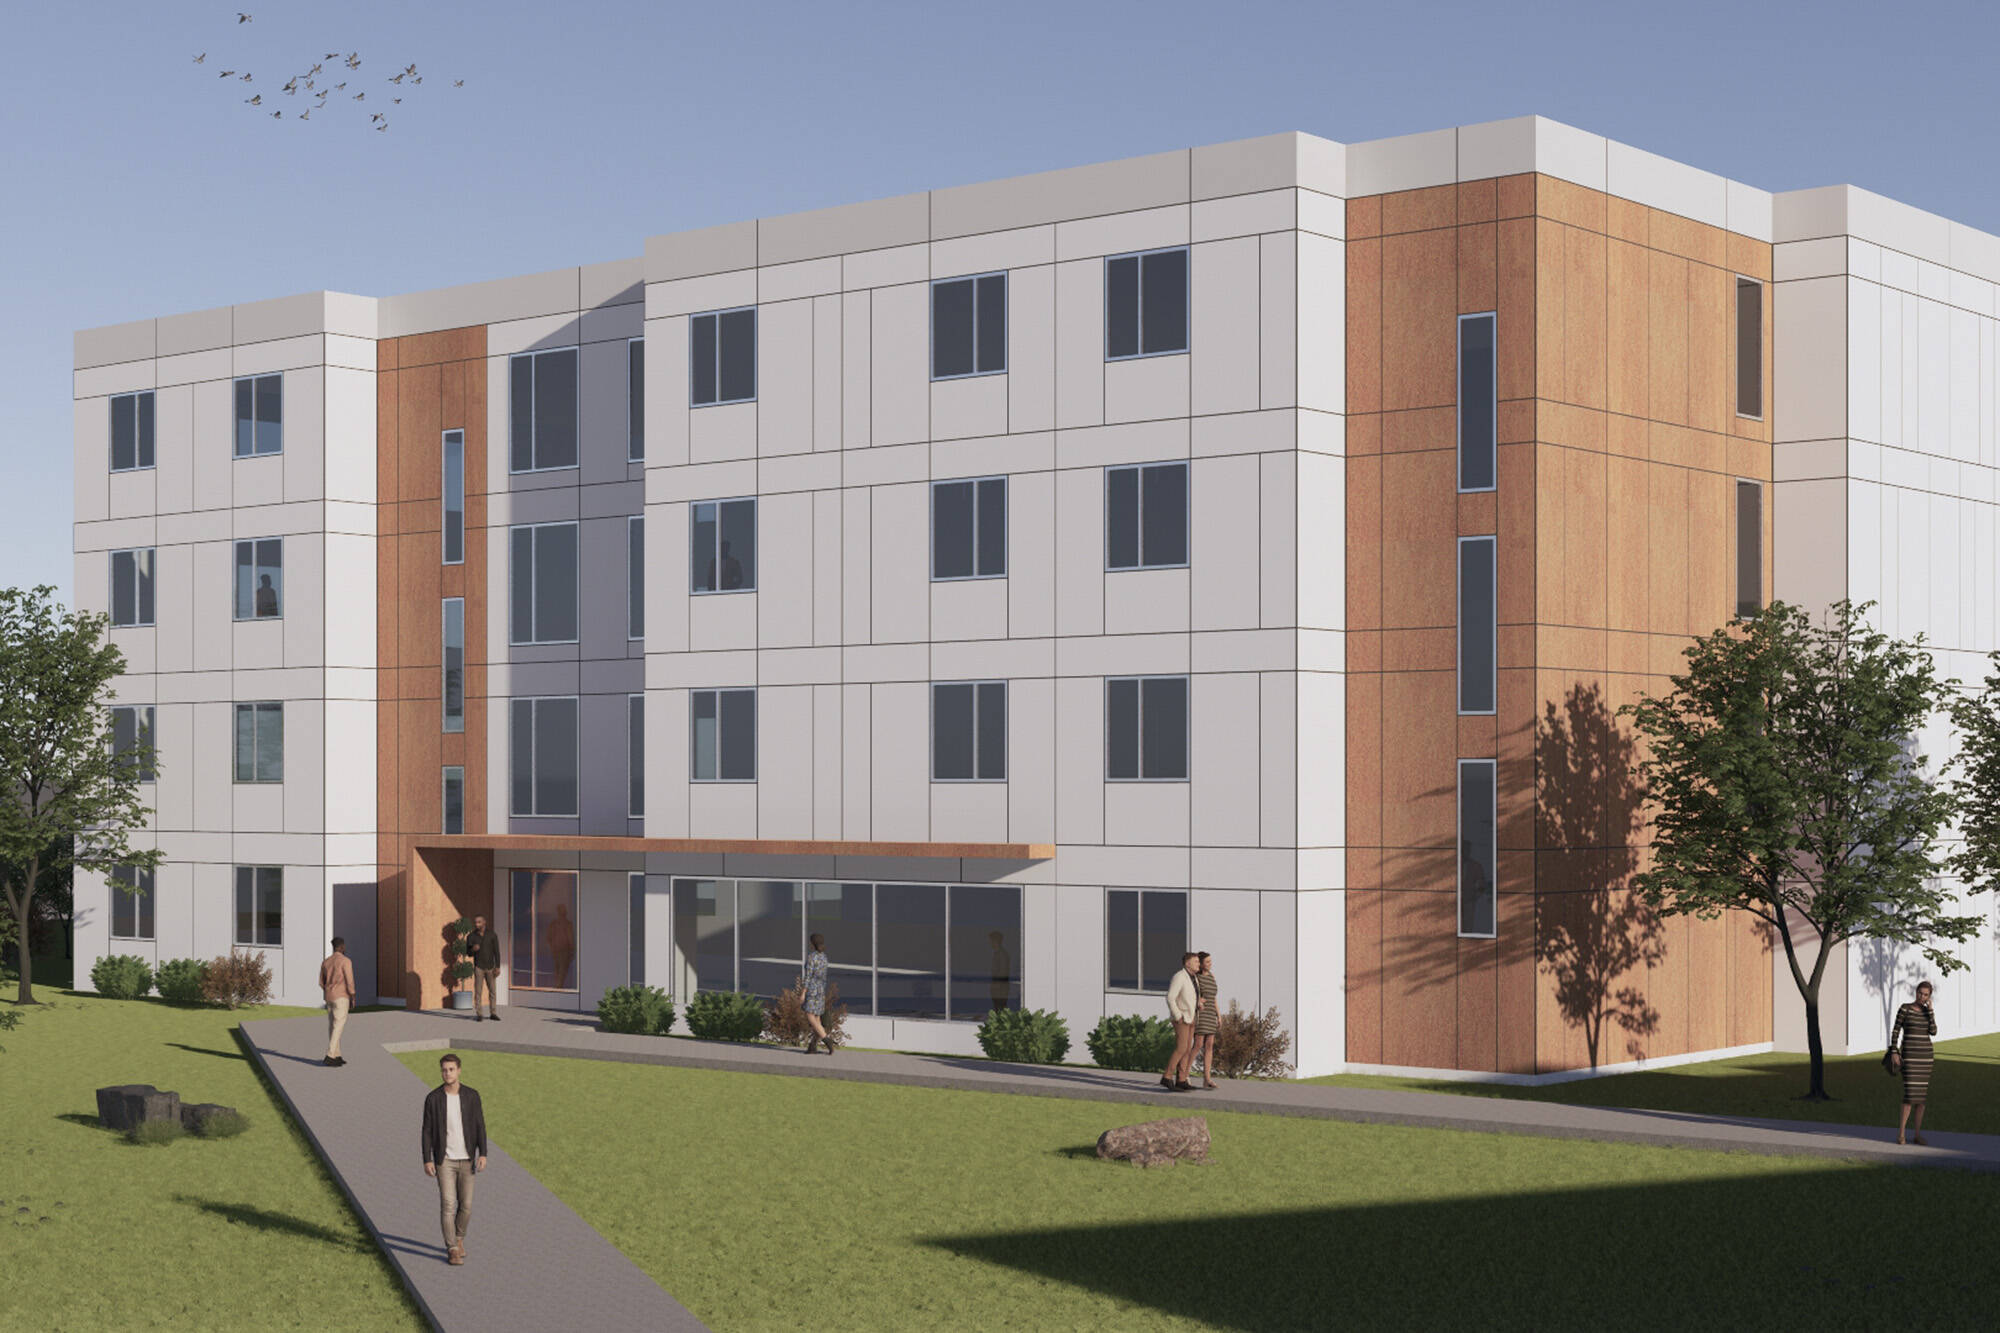 This conceptual rendering shows 60 units of student housing at the Salmon Arm campus of Okanagan College with construction expected to begin in 2022 and be completed by 2024. (Okanagan College image)